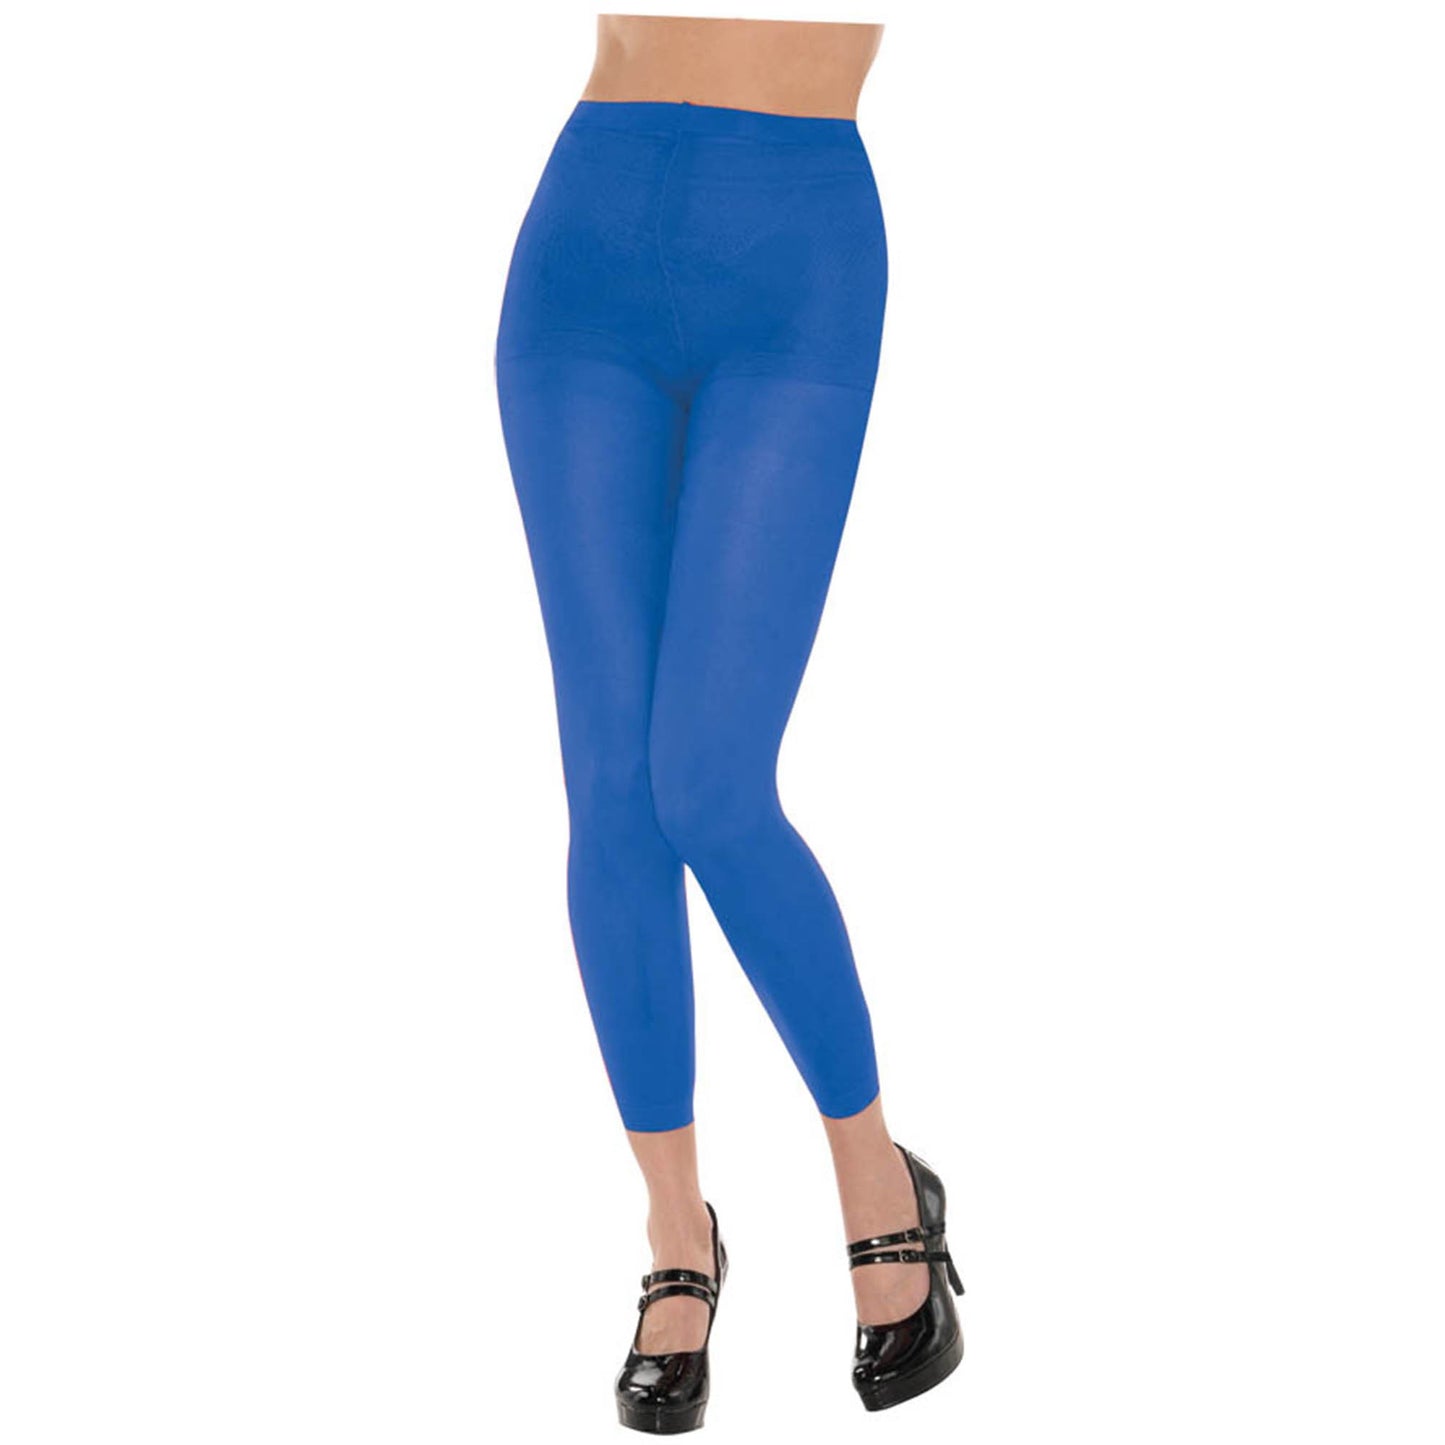 Footless Tights - Blue